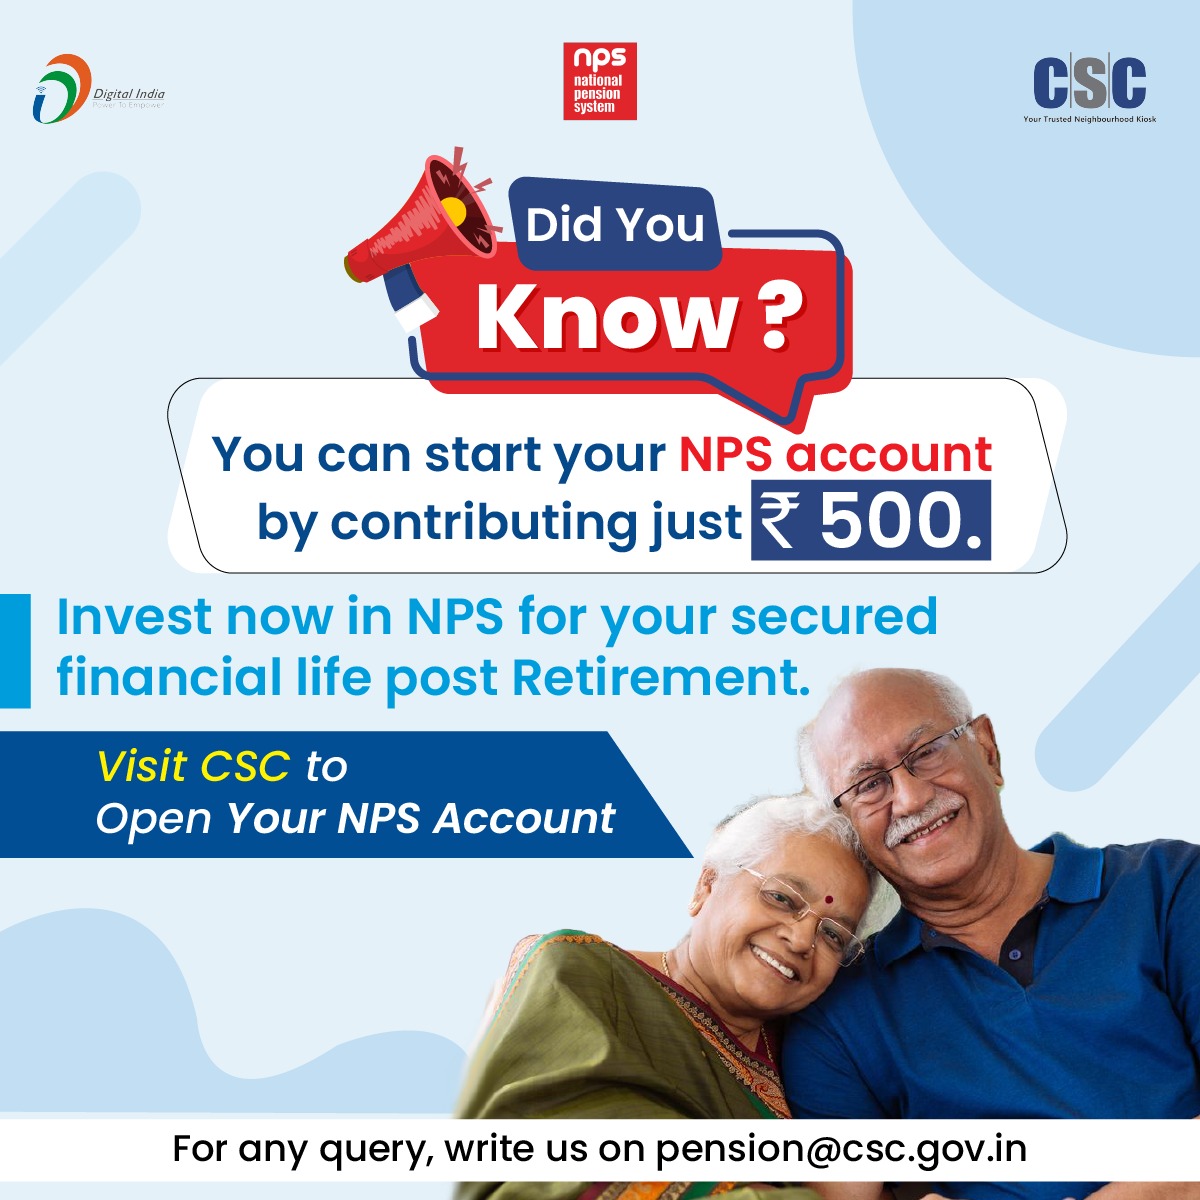 Did You Know? You can start your NPS account by contributing just Rs.500. Invest now in #NPS for your secured financial life Post Retirement Visit #CSC to Open Your NPS Account @Krisiirm @sanjaykrakesh @sarvdeep81 @CSCegov_ #DigitalIndia #NationalPensionScheme #PensionScheme